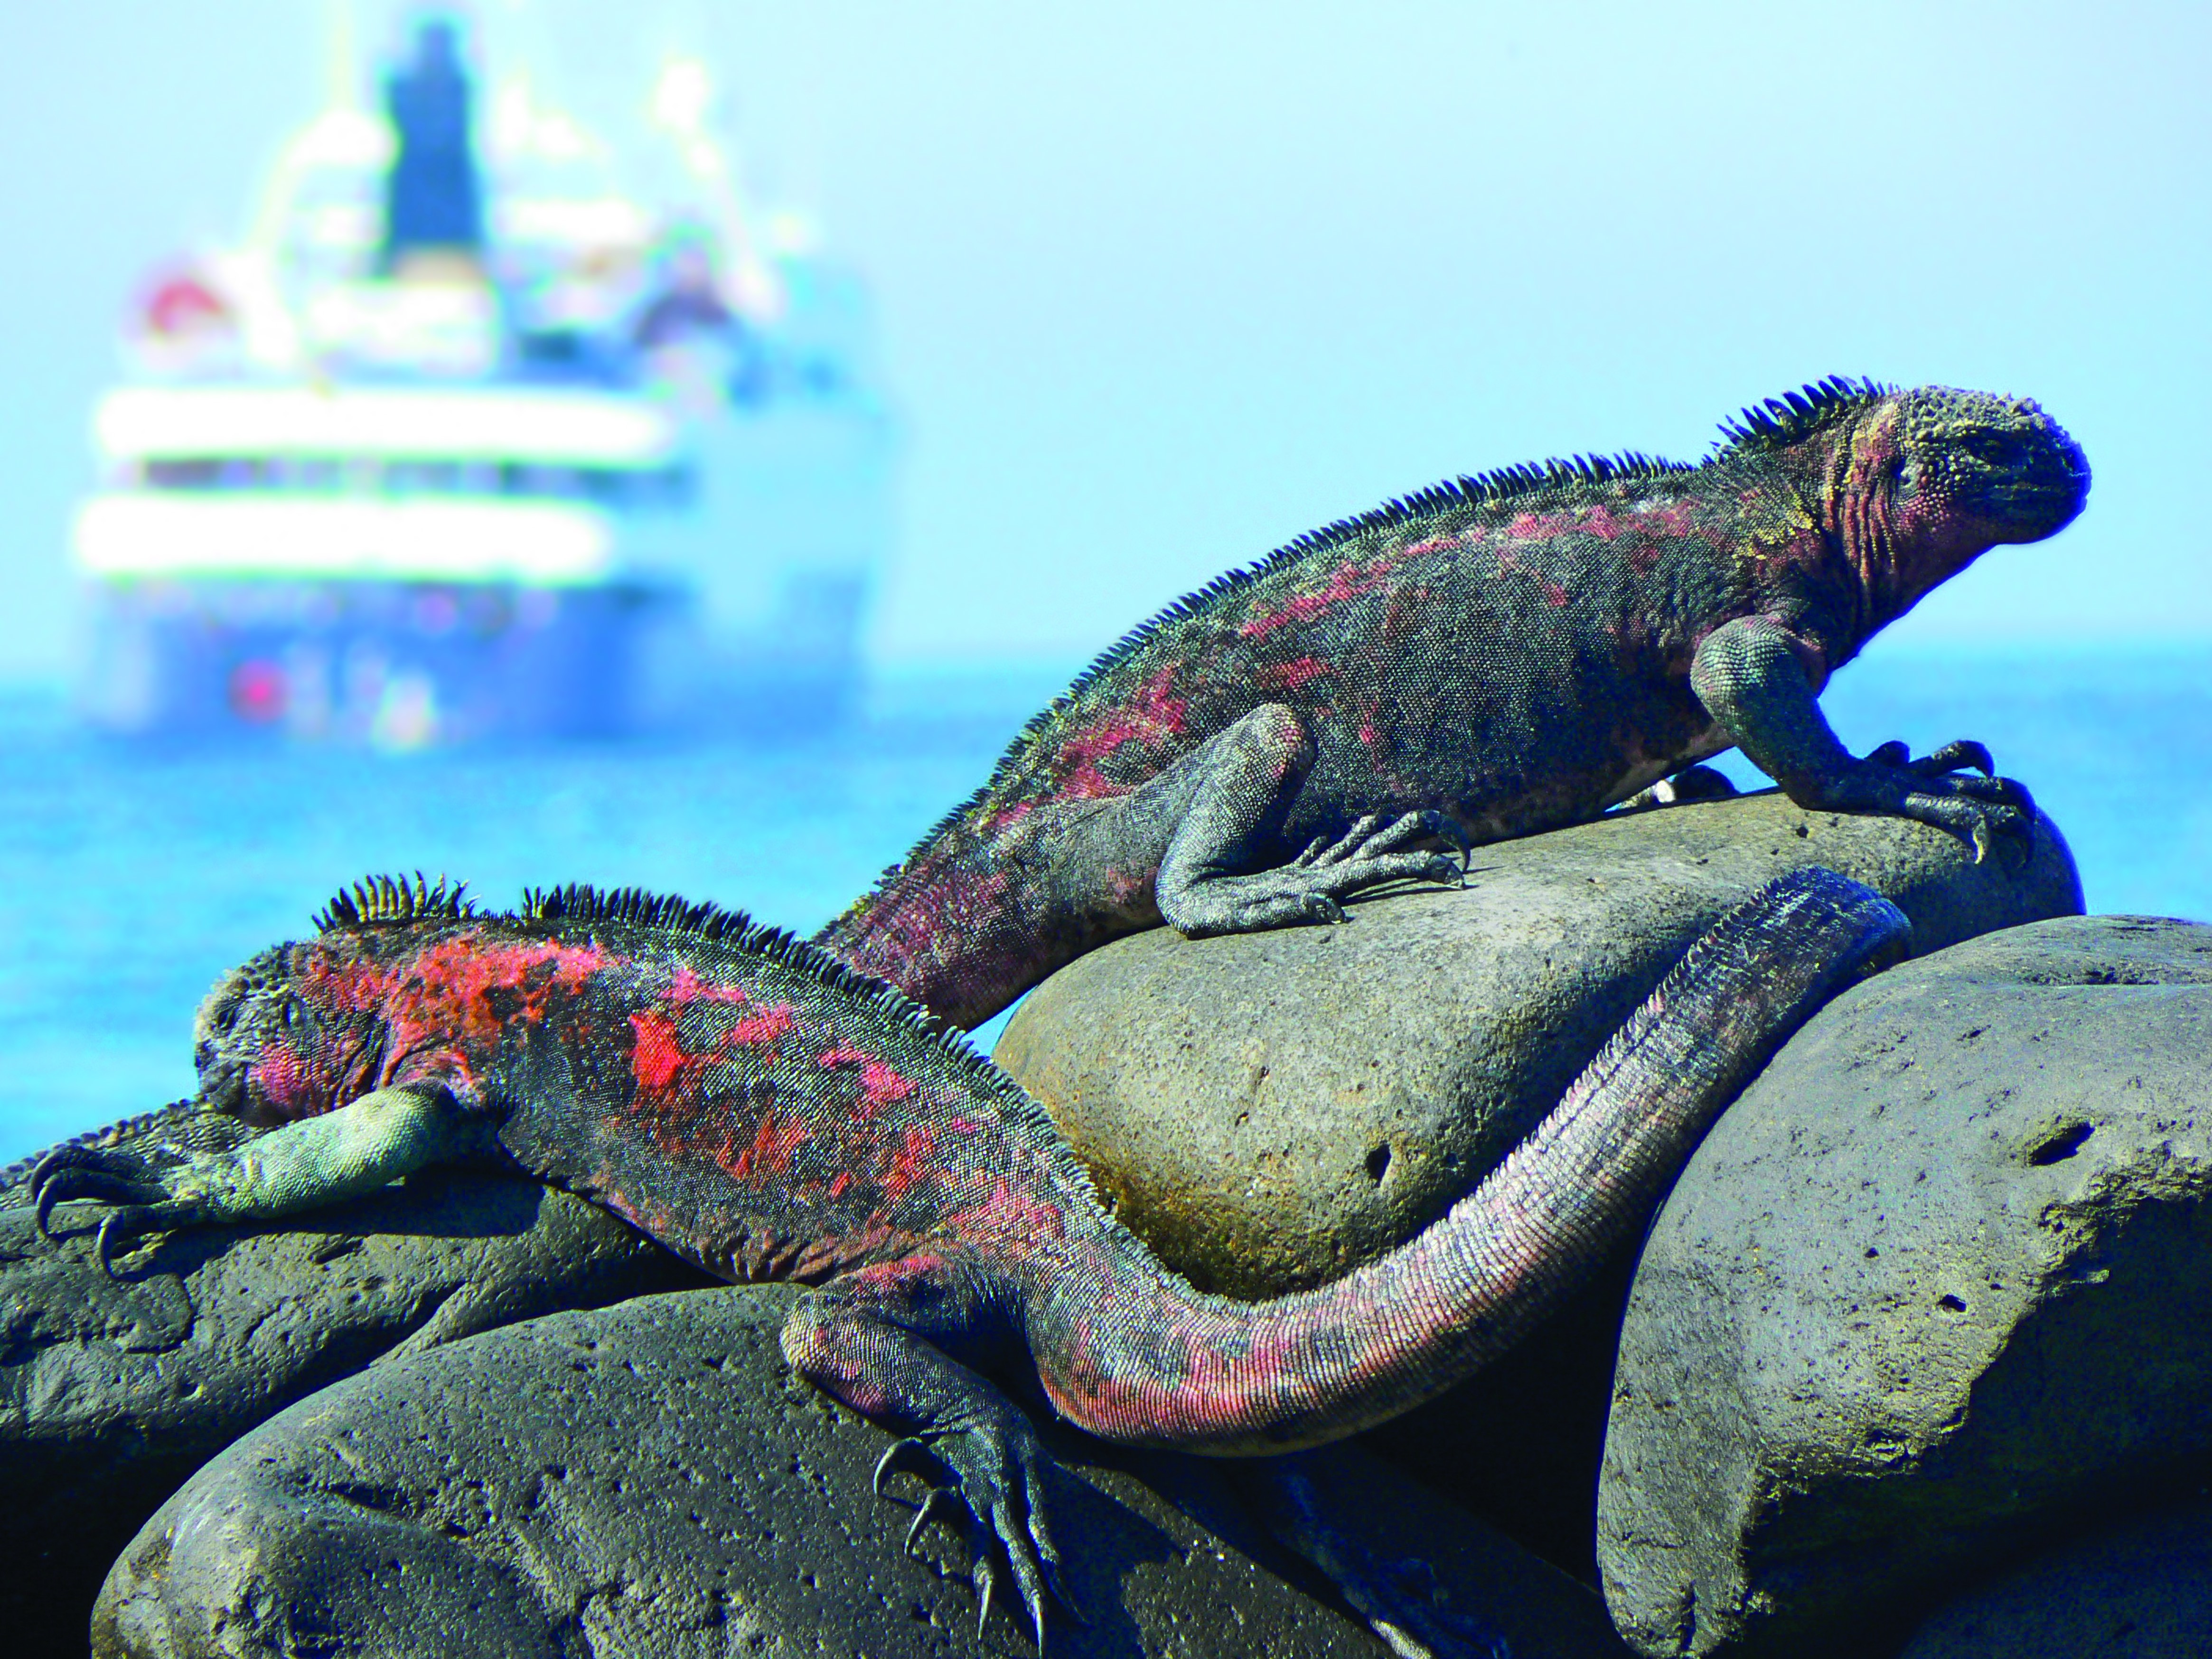 Discover the Galapagos aboard the Celebrity Xpedition